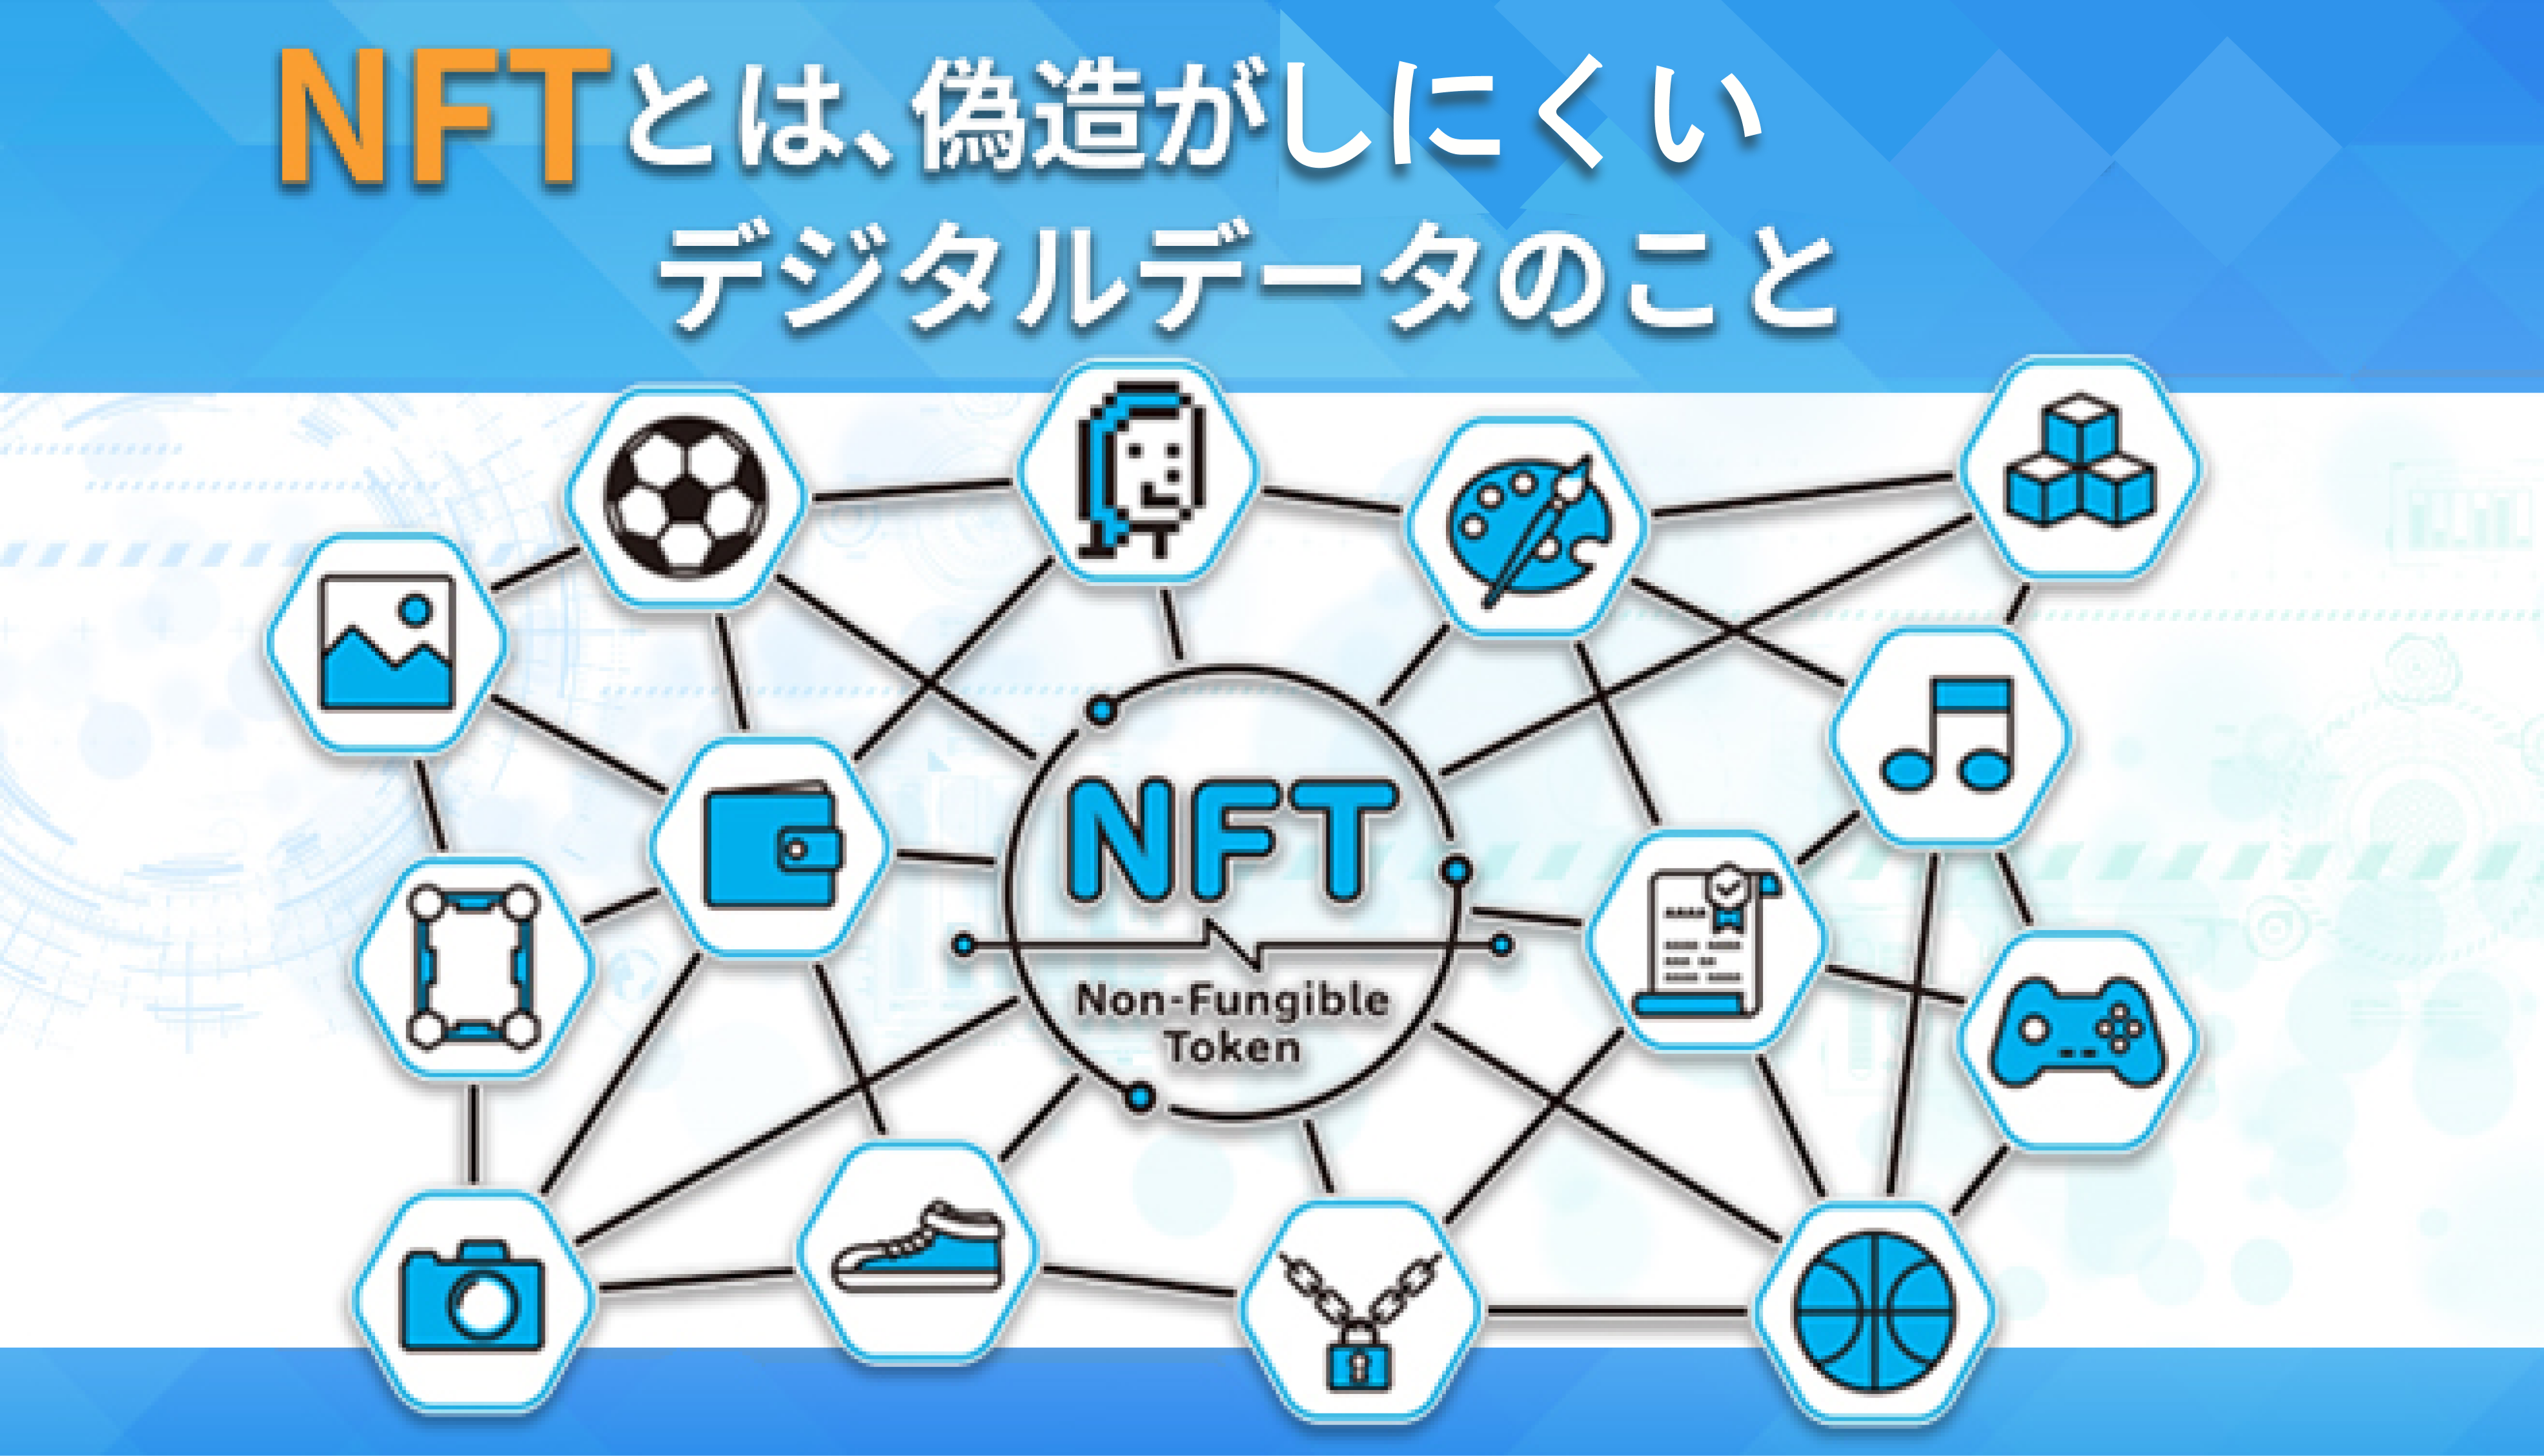 What are NFTs?